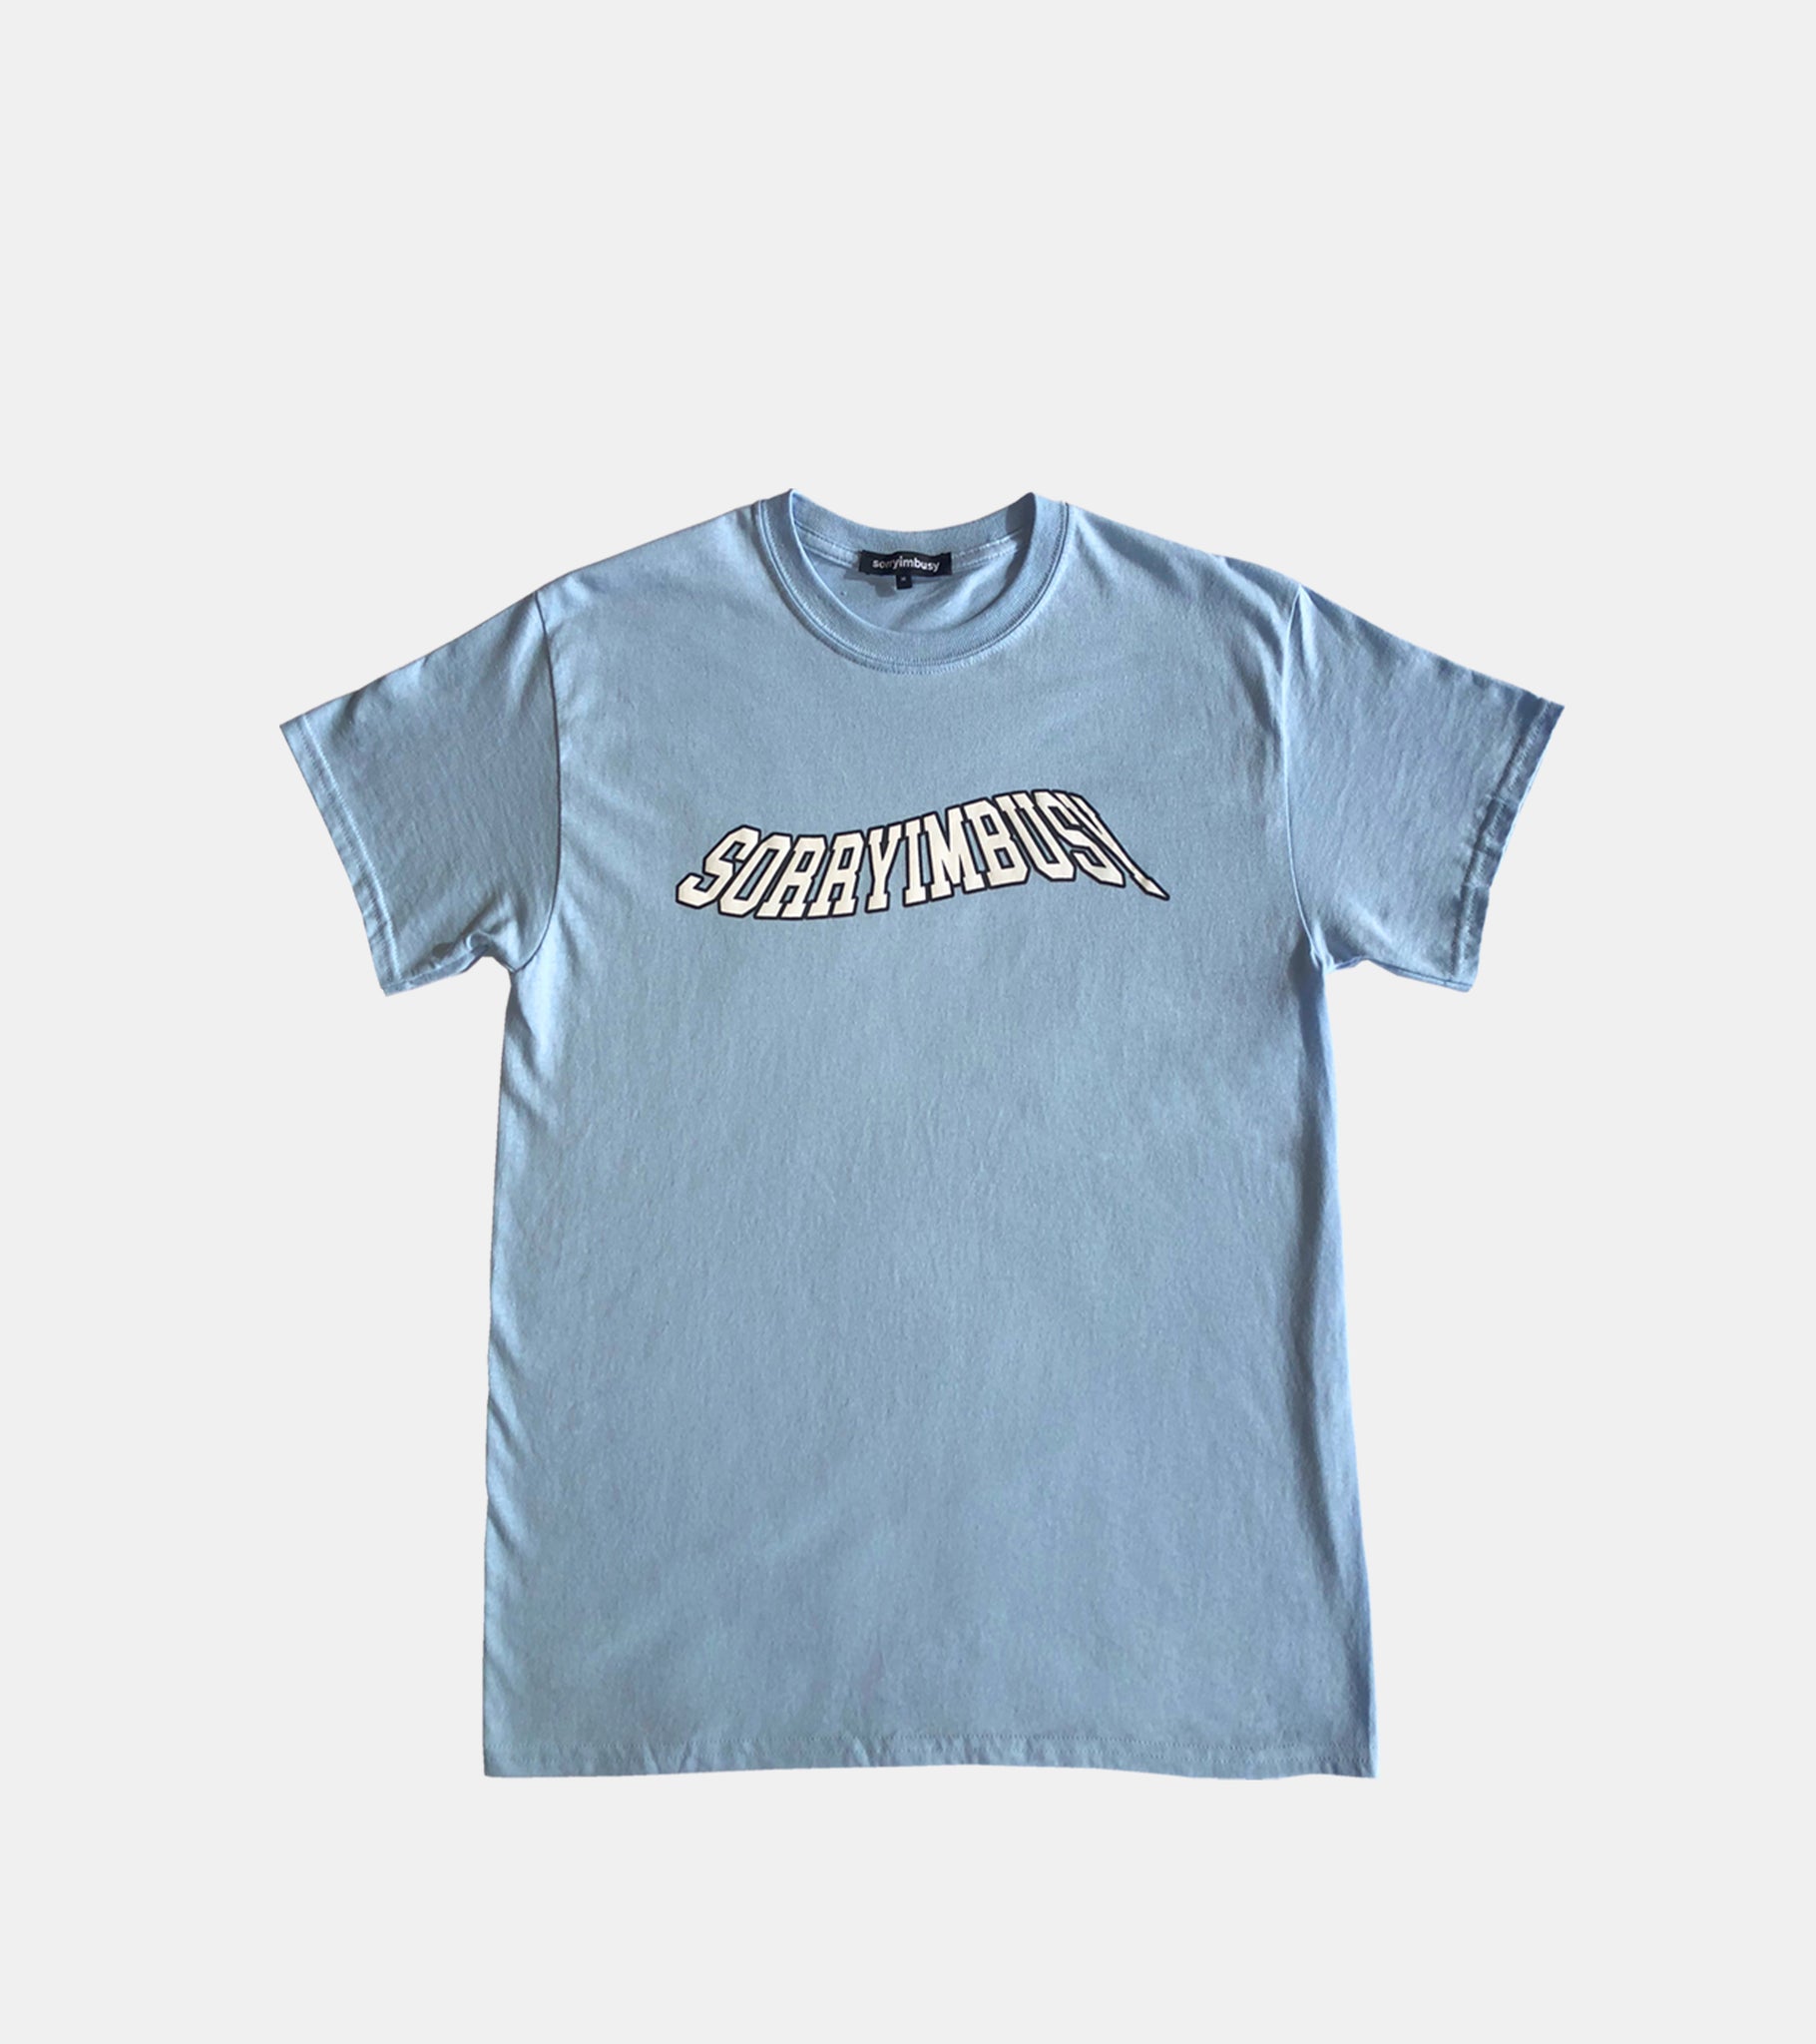 'WAVE' T-Shirt - Baby Blue - SORRYIMBUSY